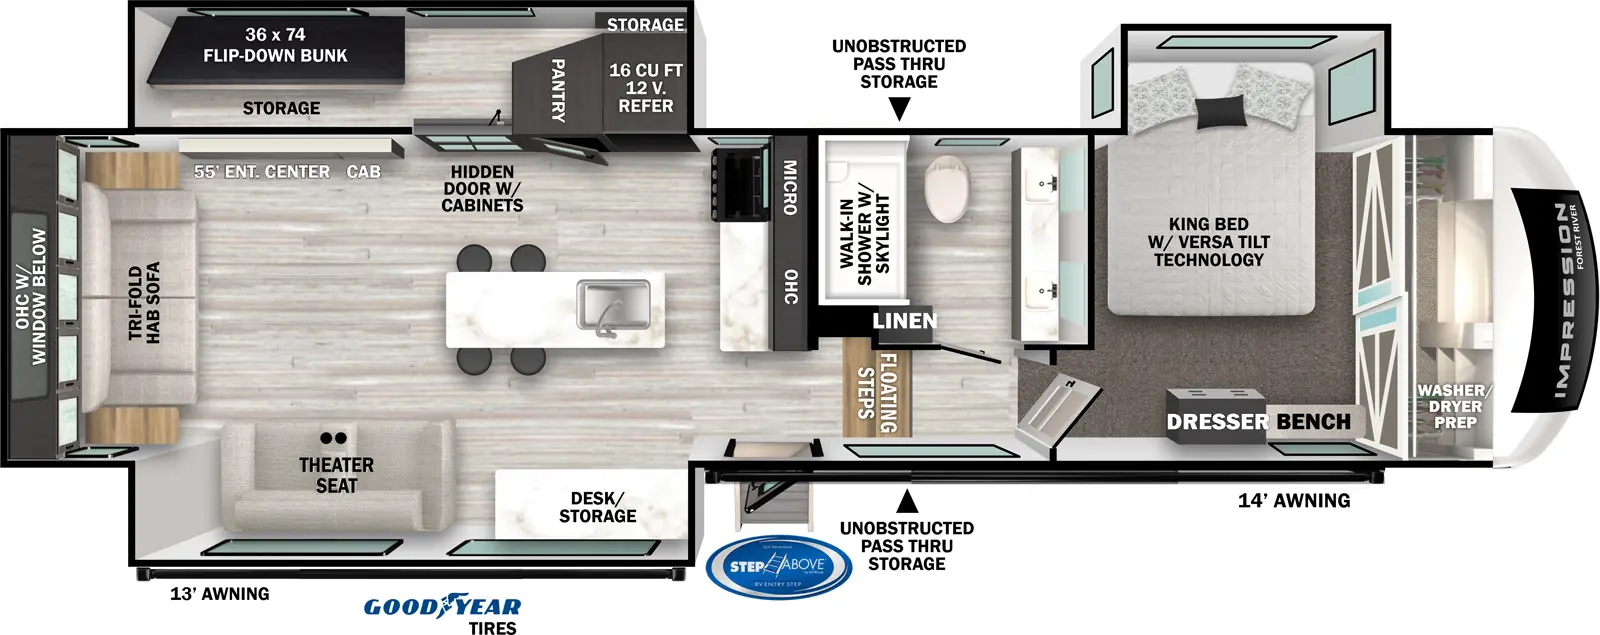 The 318RLVIEW has three slideouts and one entry. Exterior features a 13 foot awning, 14 foot awning, MORryde Step Above entry steps, Goodyear tires, and unobstructed pass-thru storage. Interior layout front to back: front wardrobe with washer/dryer prep, off-door side king bed slideout with versa tilt, and door side dresser and bench; off-door side full bathroom with walk-in shower with skylight and linen closet; floating steps down to main living area and entry; kitchen island with seating and sink; kitchen counter with overhead cabinet, microwave and cooktop along inner wall; off-door side slideout with 12V refrigerator, pantry, hidden door with cabinets with flip down bunk, and storage behind, and entertainment center; off-door side slideout with desk/storage, and theater seat; rear tri-fold hide-a-bed sofa with overhead cabinet with window below.